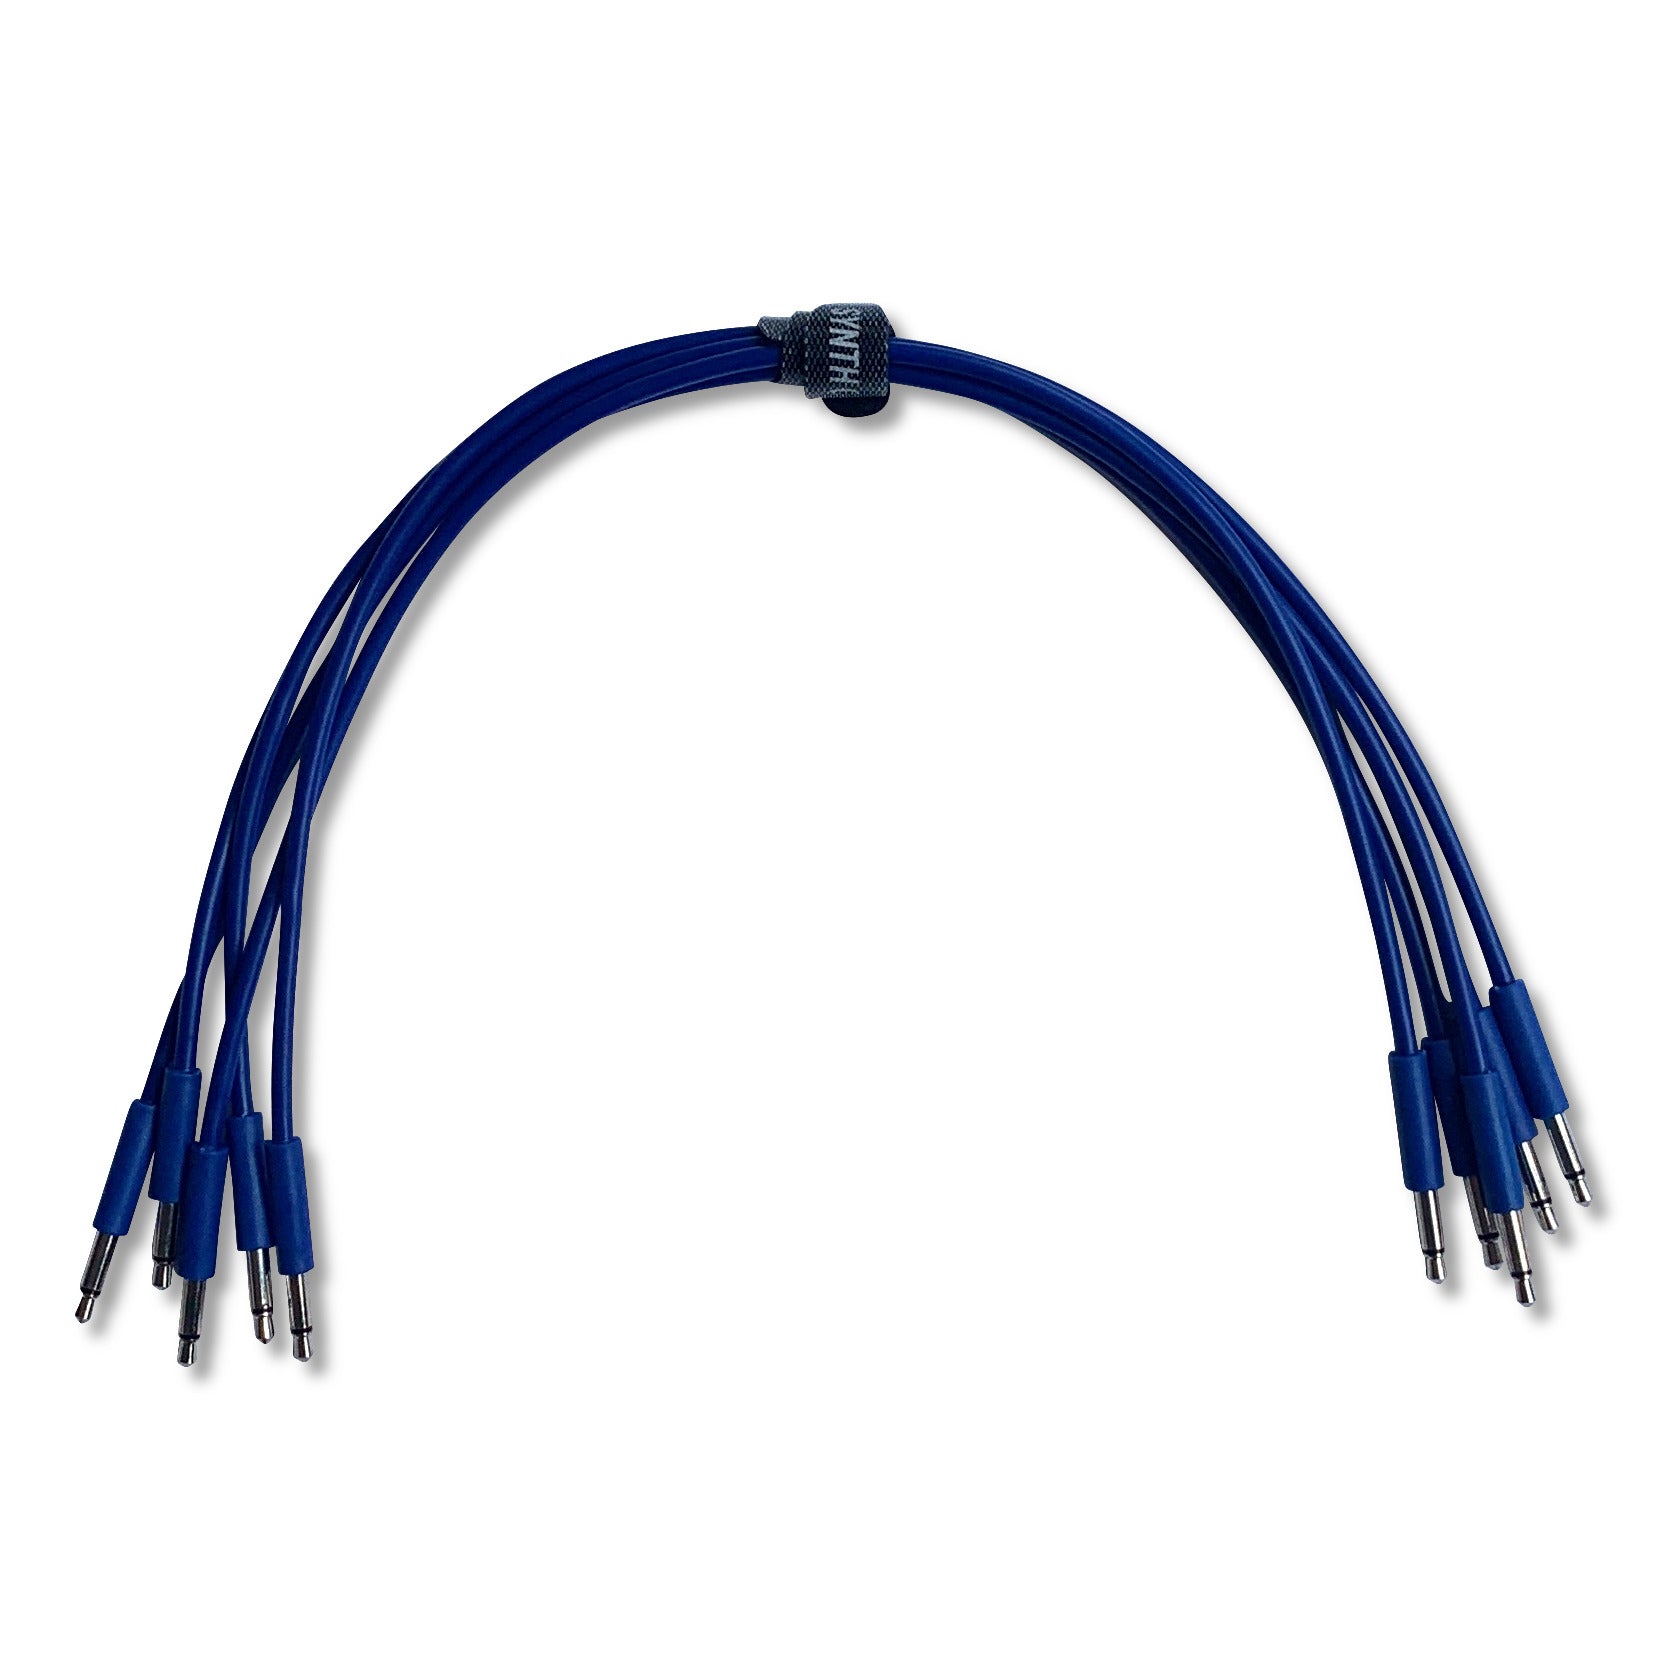 Eurorack patch cables in blue